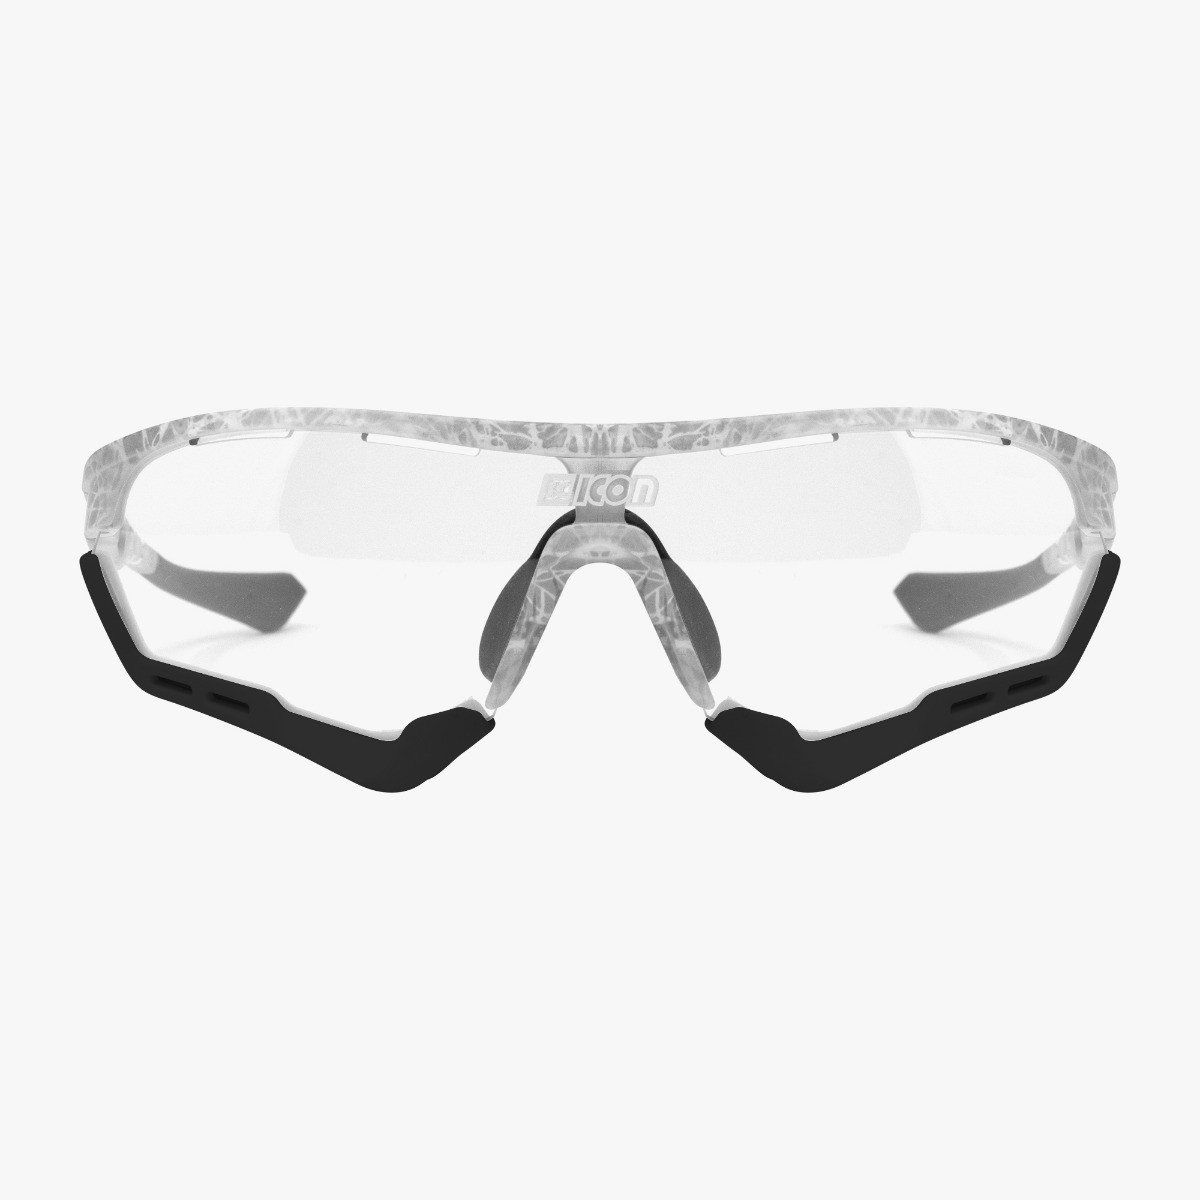 Scicon Sports | Aerotech Sport Cycling Performance Sunglasses - Frozen White / Photocromatic Bronze - EY13170501